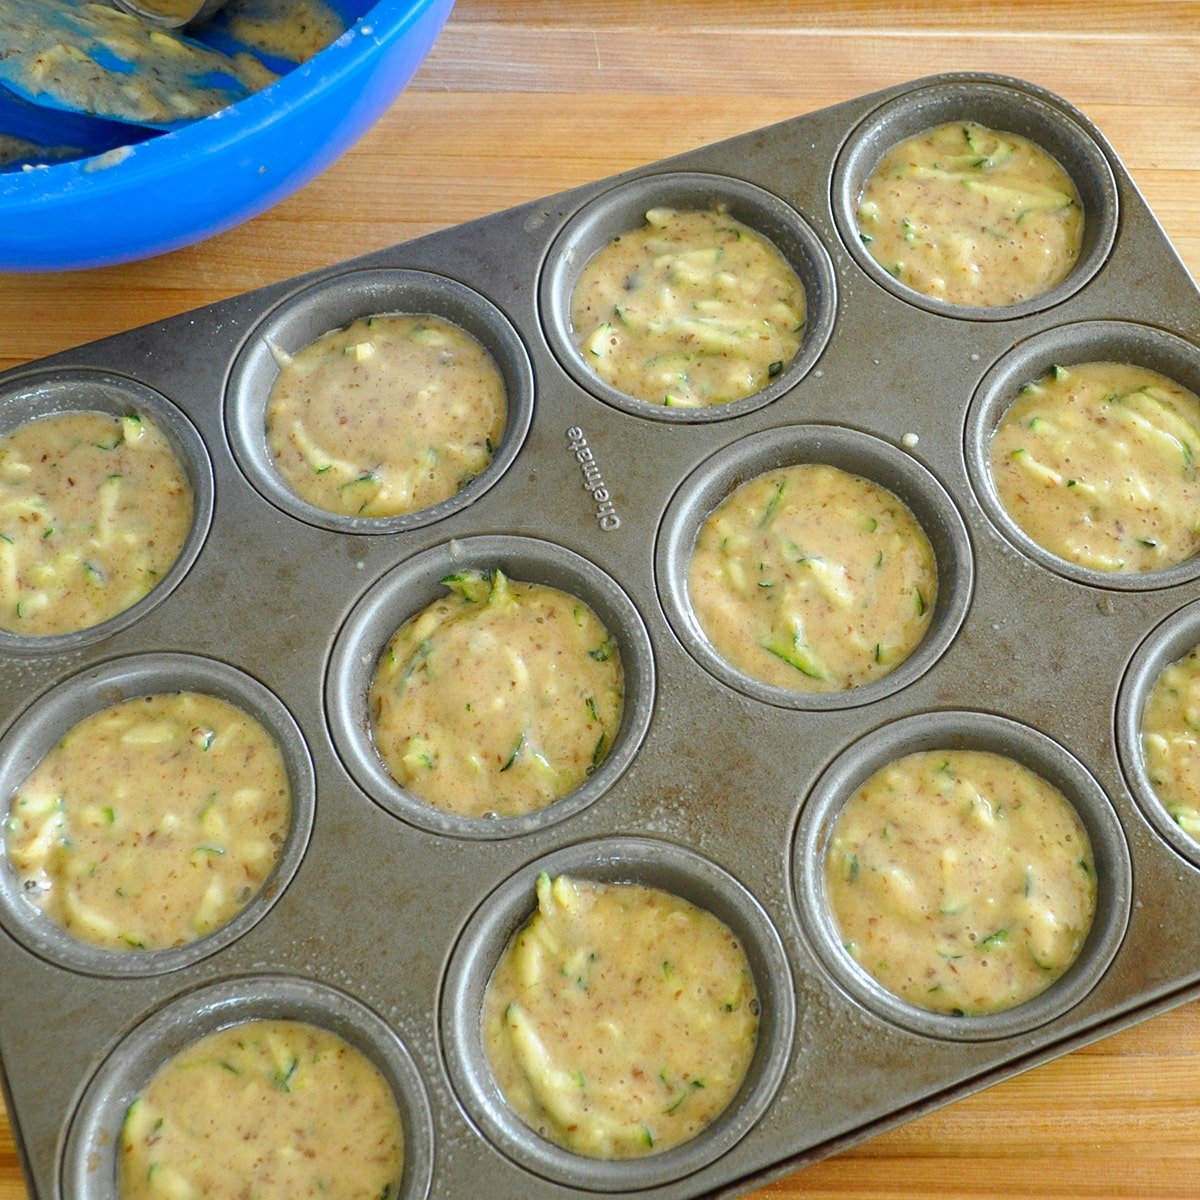 a muffin pan filled with zucchini muffins batter ready to bake